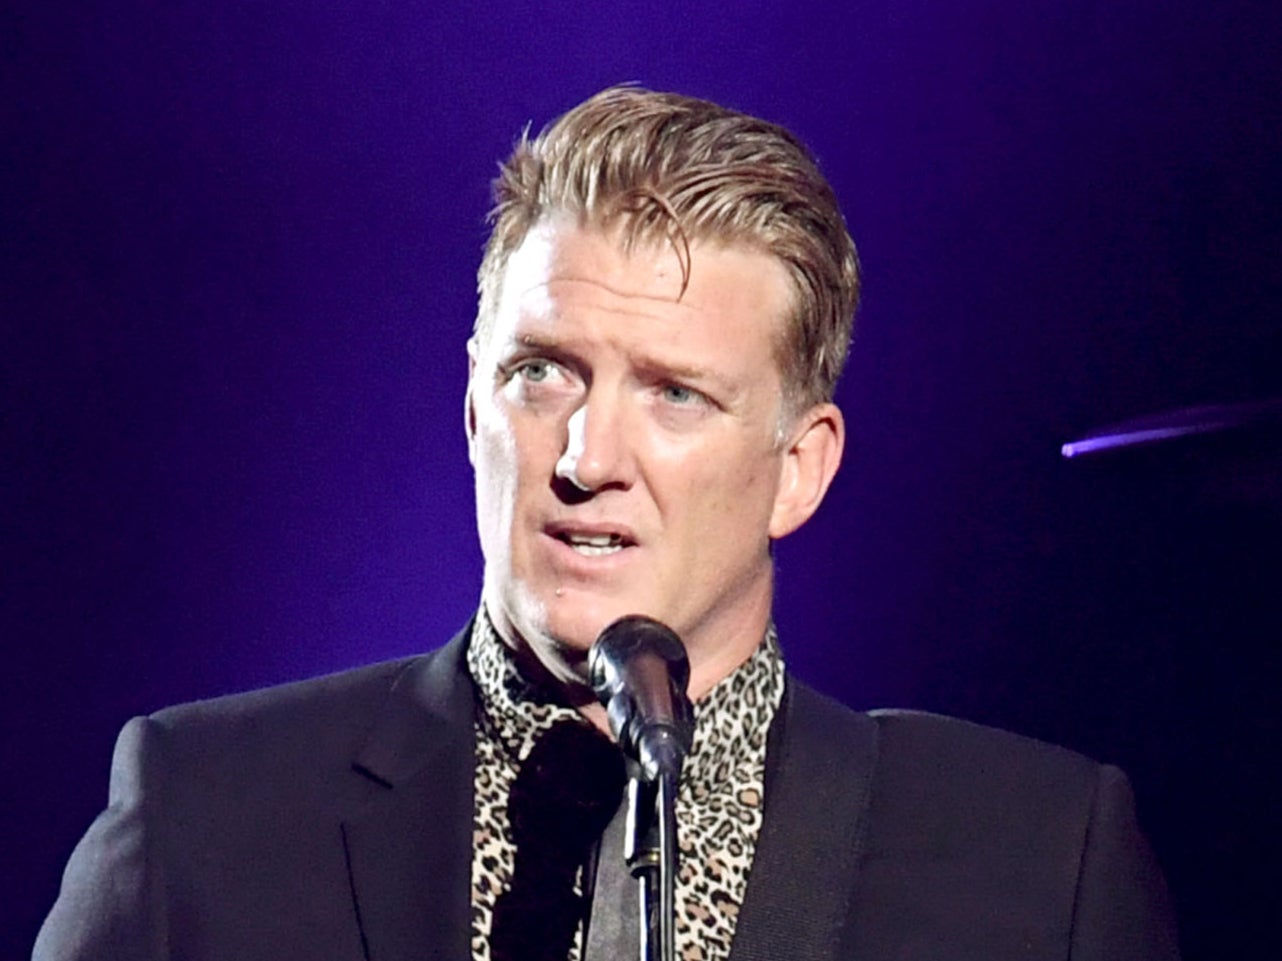 Josh Homme, lead singer of the rock band Queens of the Stone Age